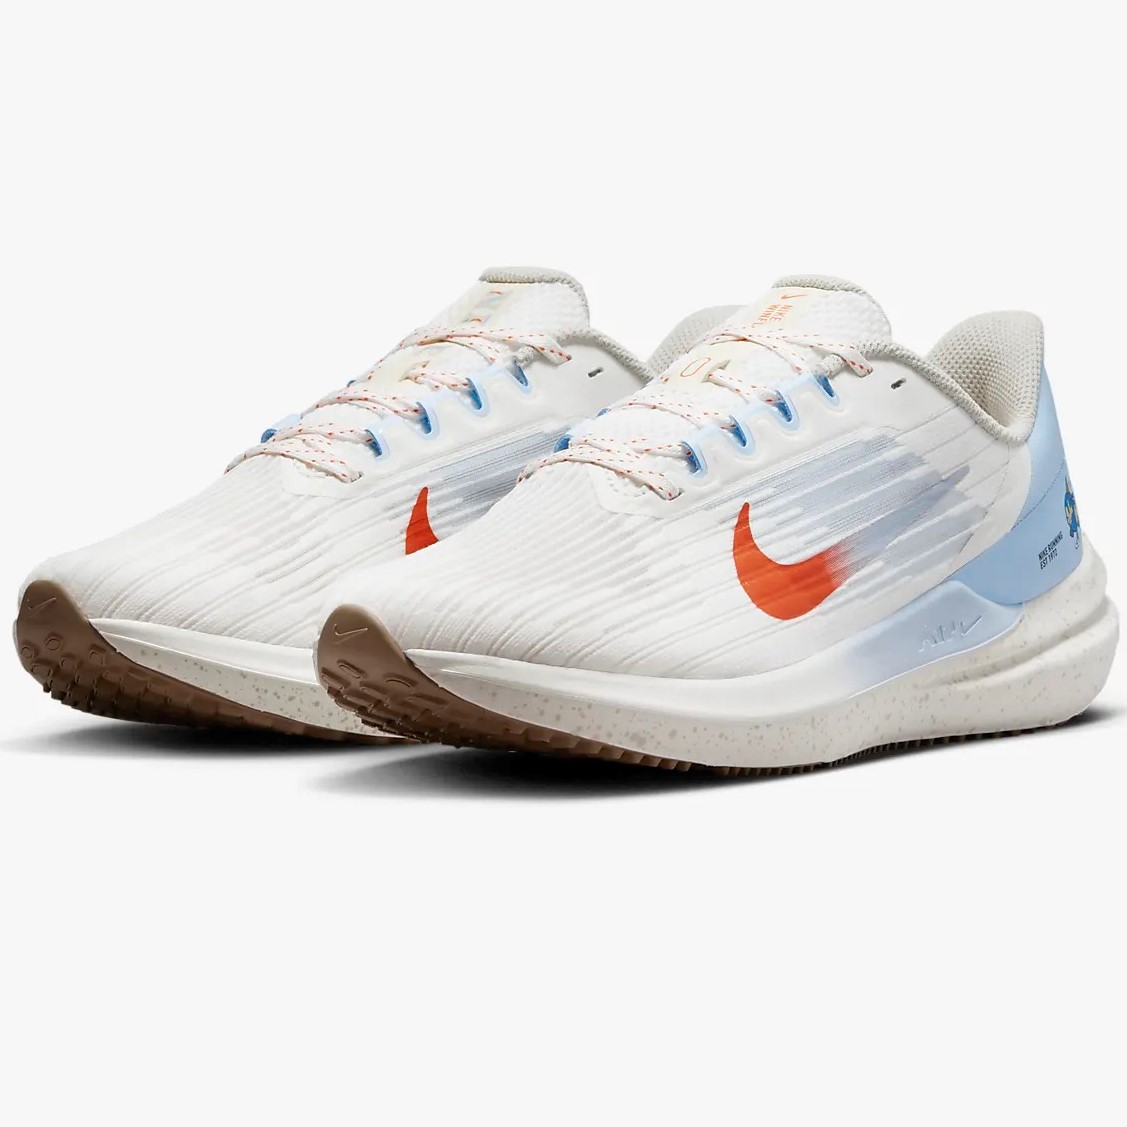 GIÀY THỂ THAO NIKE AIR WINFLO 9 LOW TOP WHITE SAIL MARATHON ROAD RUNNING SHOES DX6048-181 17